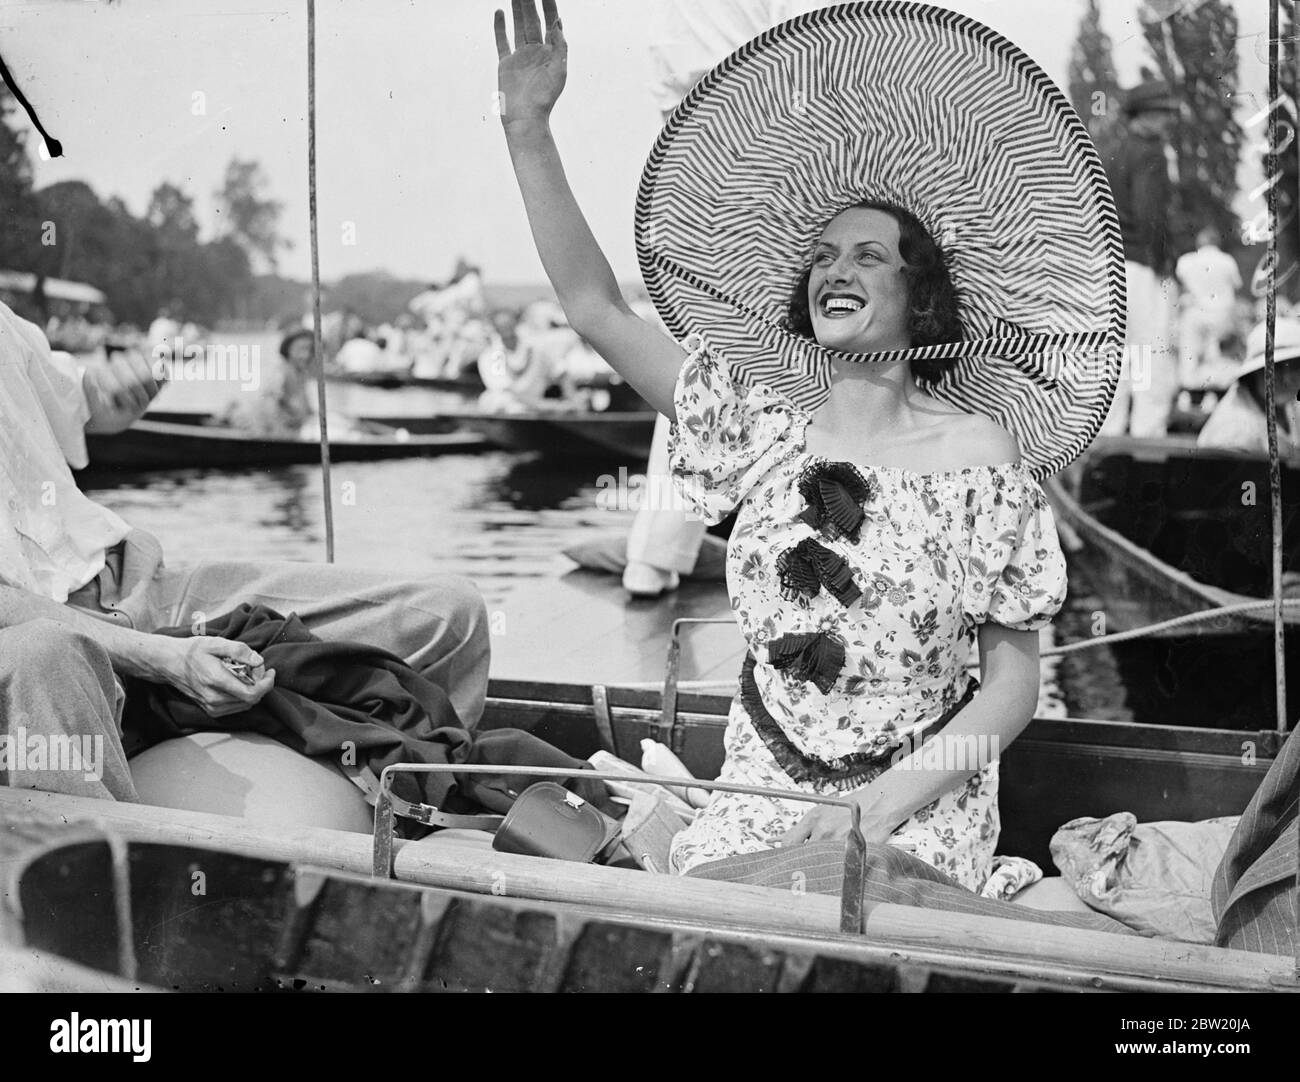 With the heatwave as encouragement, Henley's Royal Regatta vied with Ascot in variety of its fashion. An enormous hat fashion, the largest seen on the river worn by a spectator who cheered her crew to victory from a punt along the boom during the final day's racing at Henley. 3 July 1937 Stock Photo